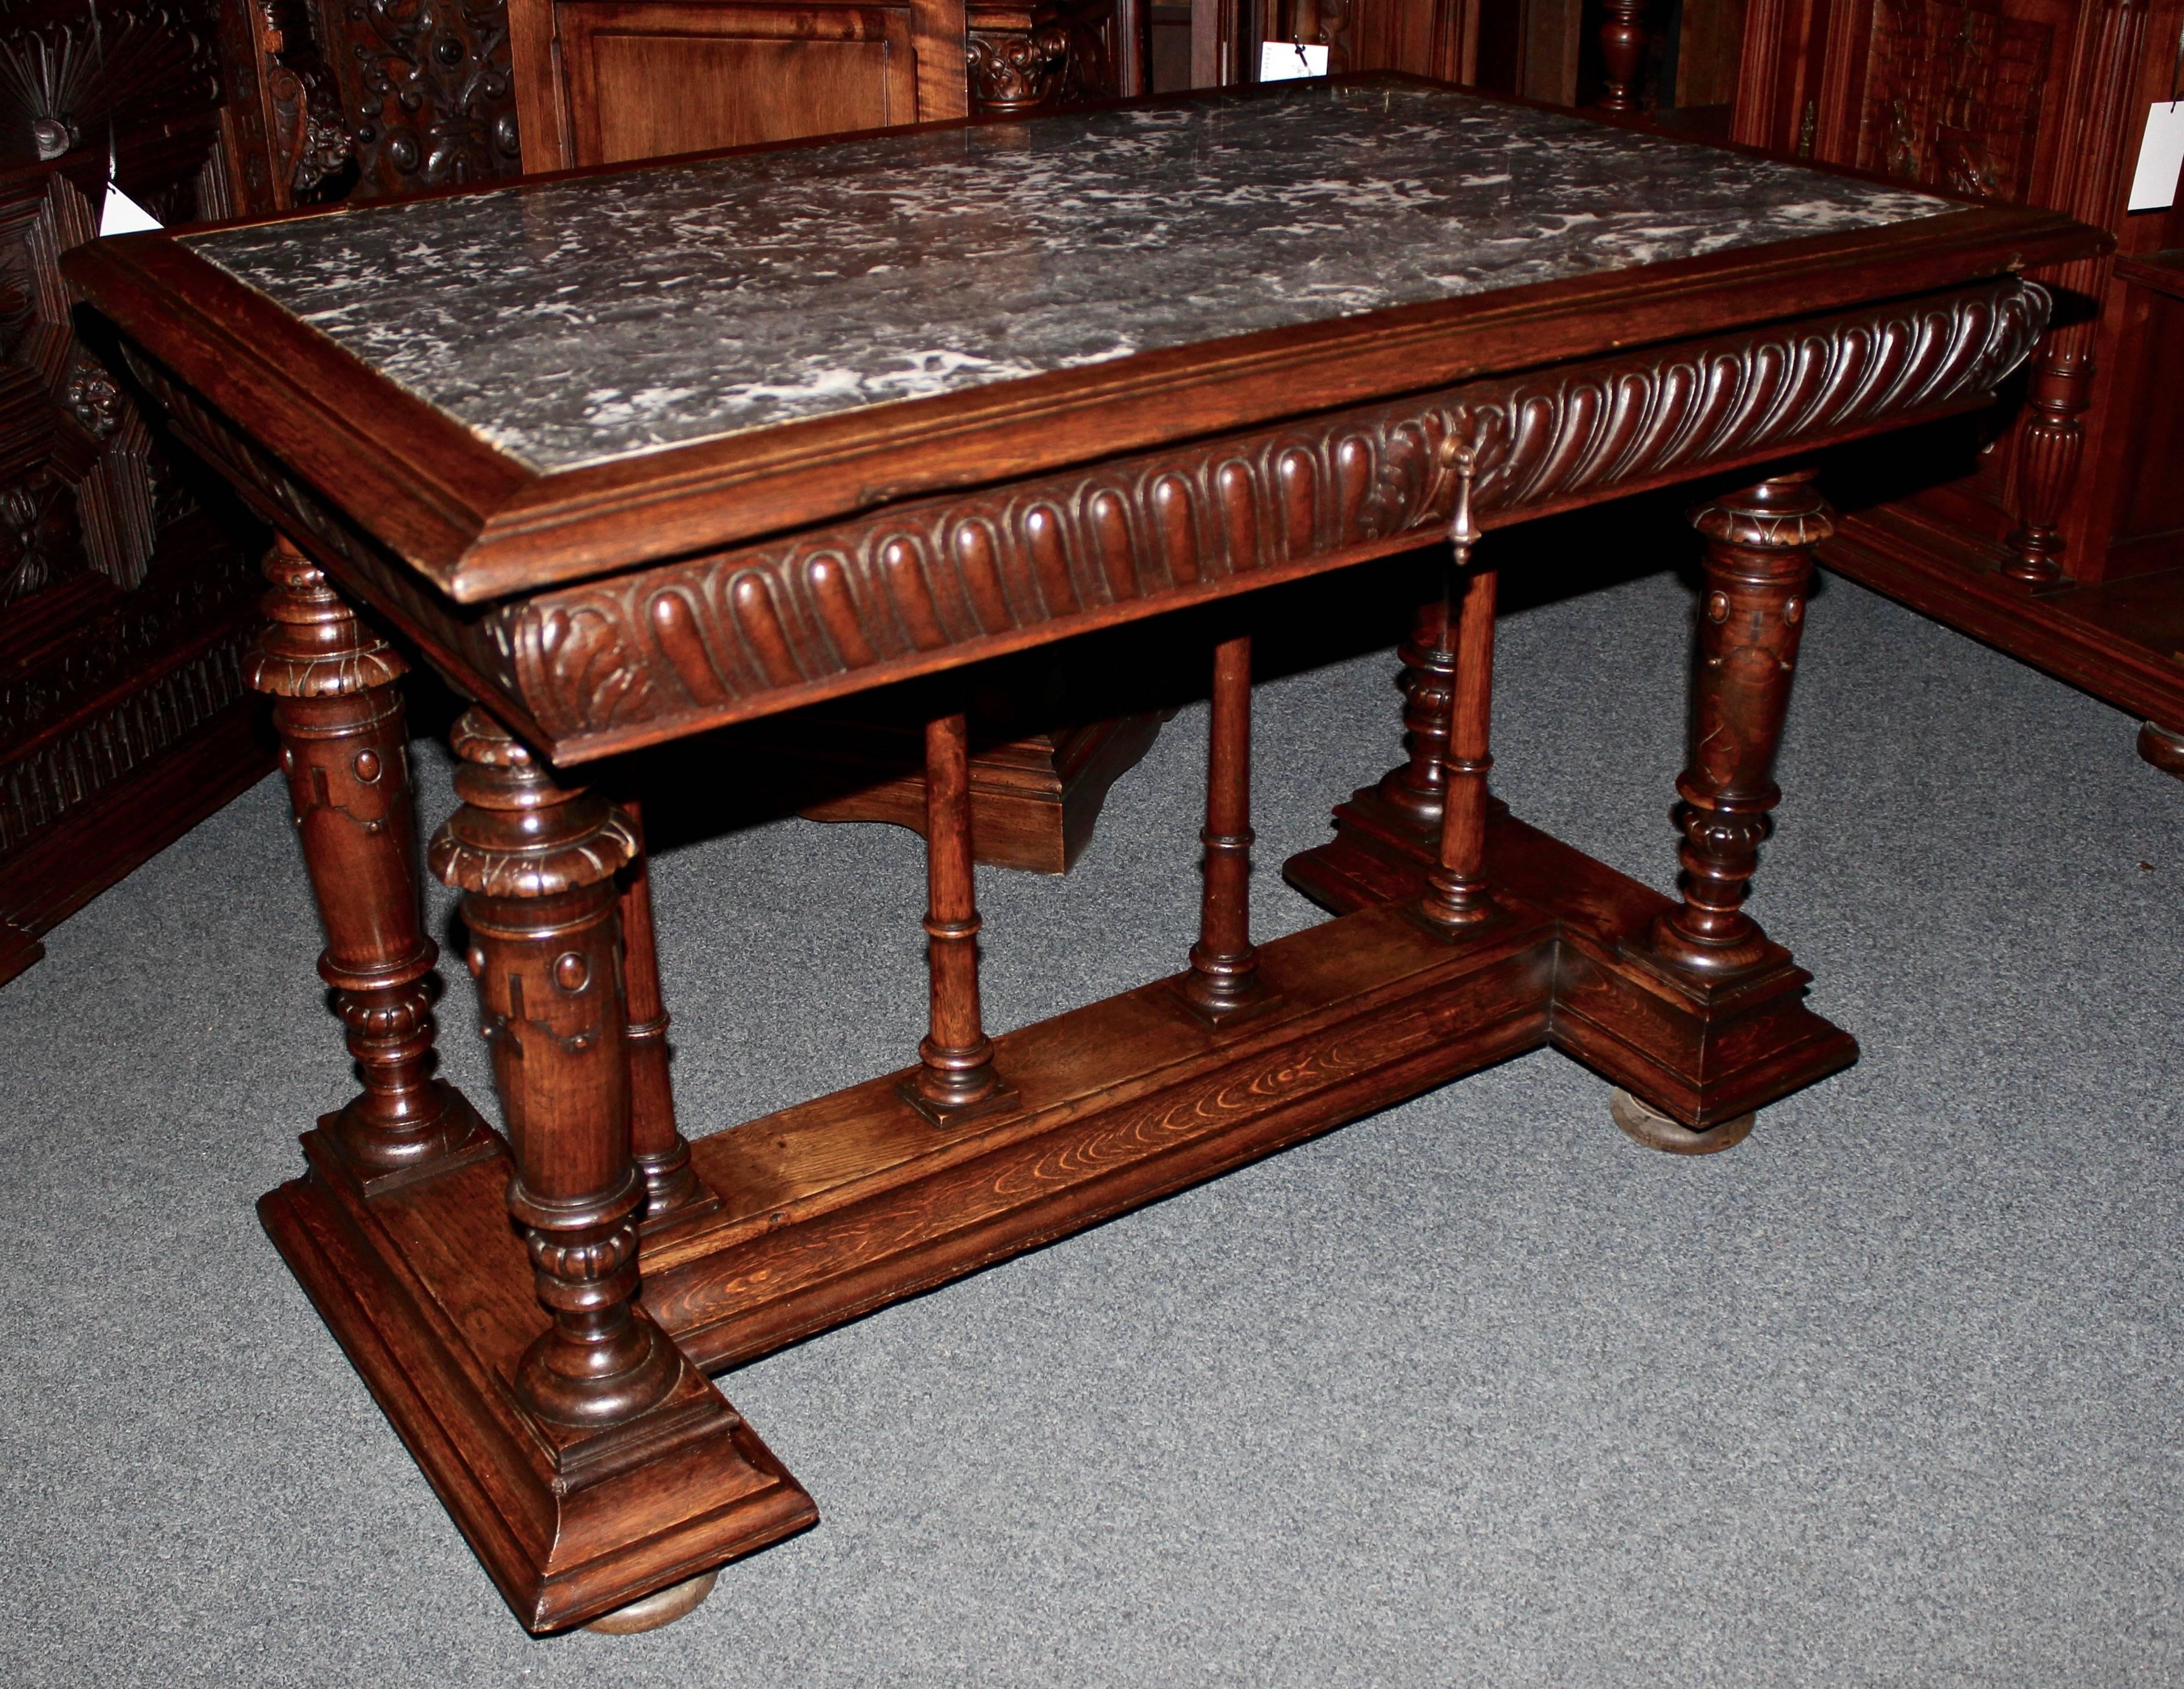 This French walnut table is hand-carved with ornate detail around its sides and on the legs.  It is topped with a gorgeous piece of gray and white marble.  Storage includes one large pull-out drawer.